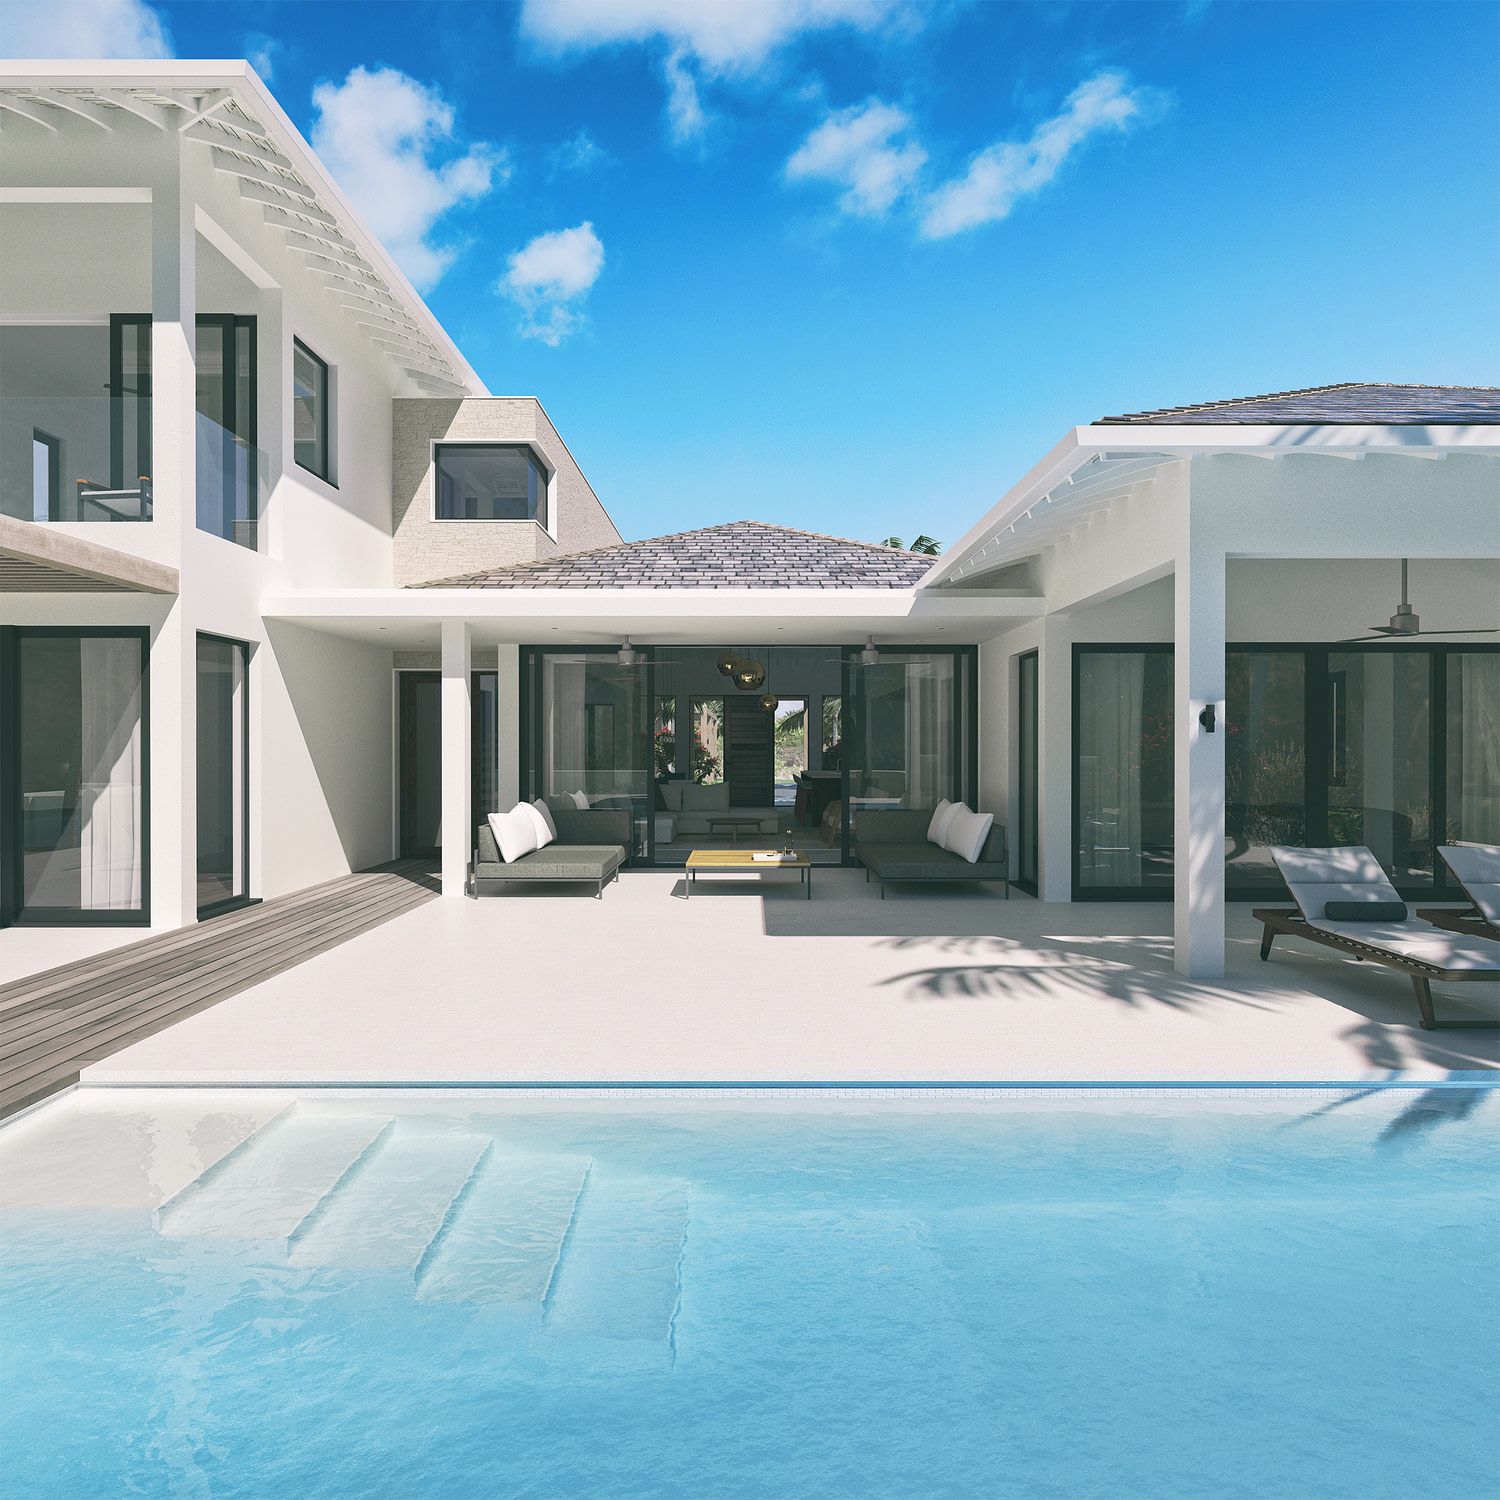 Rendered image of the swimming pool and villa